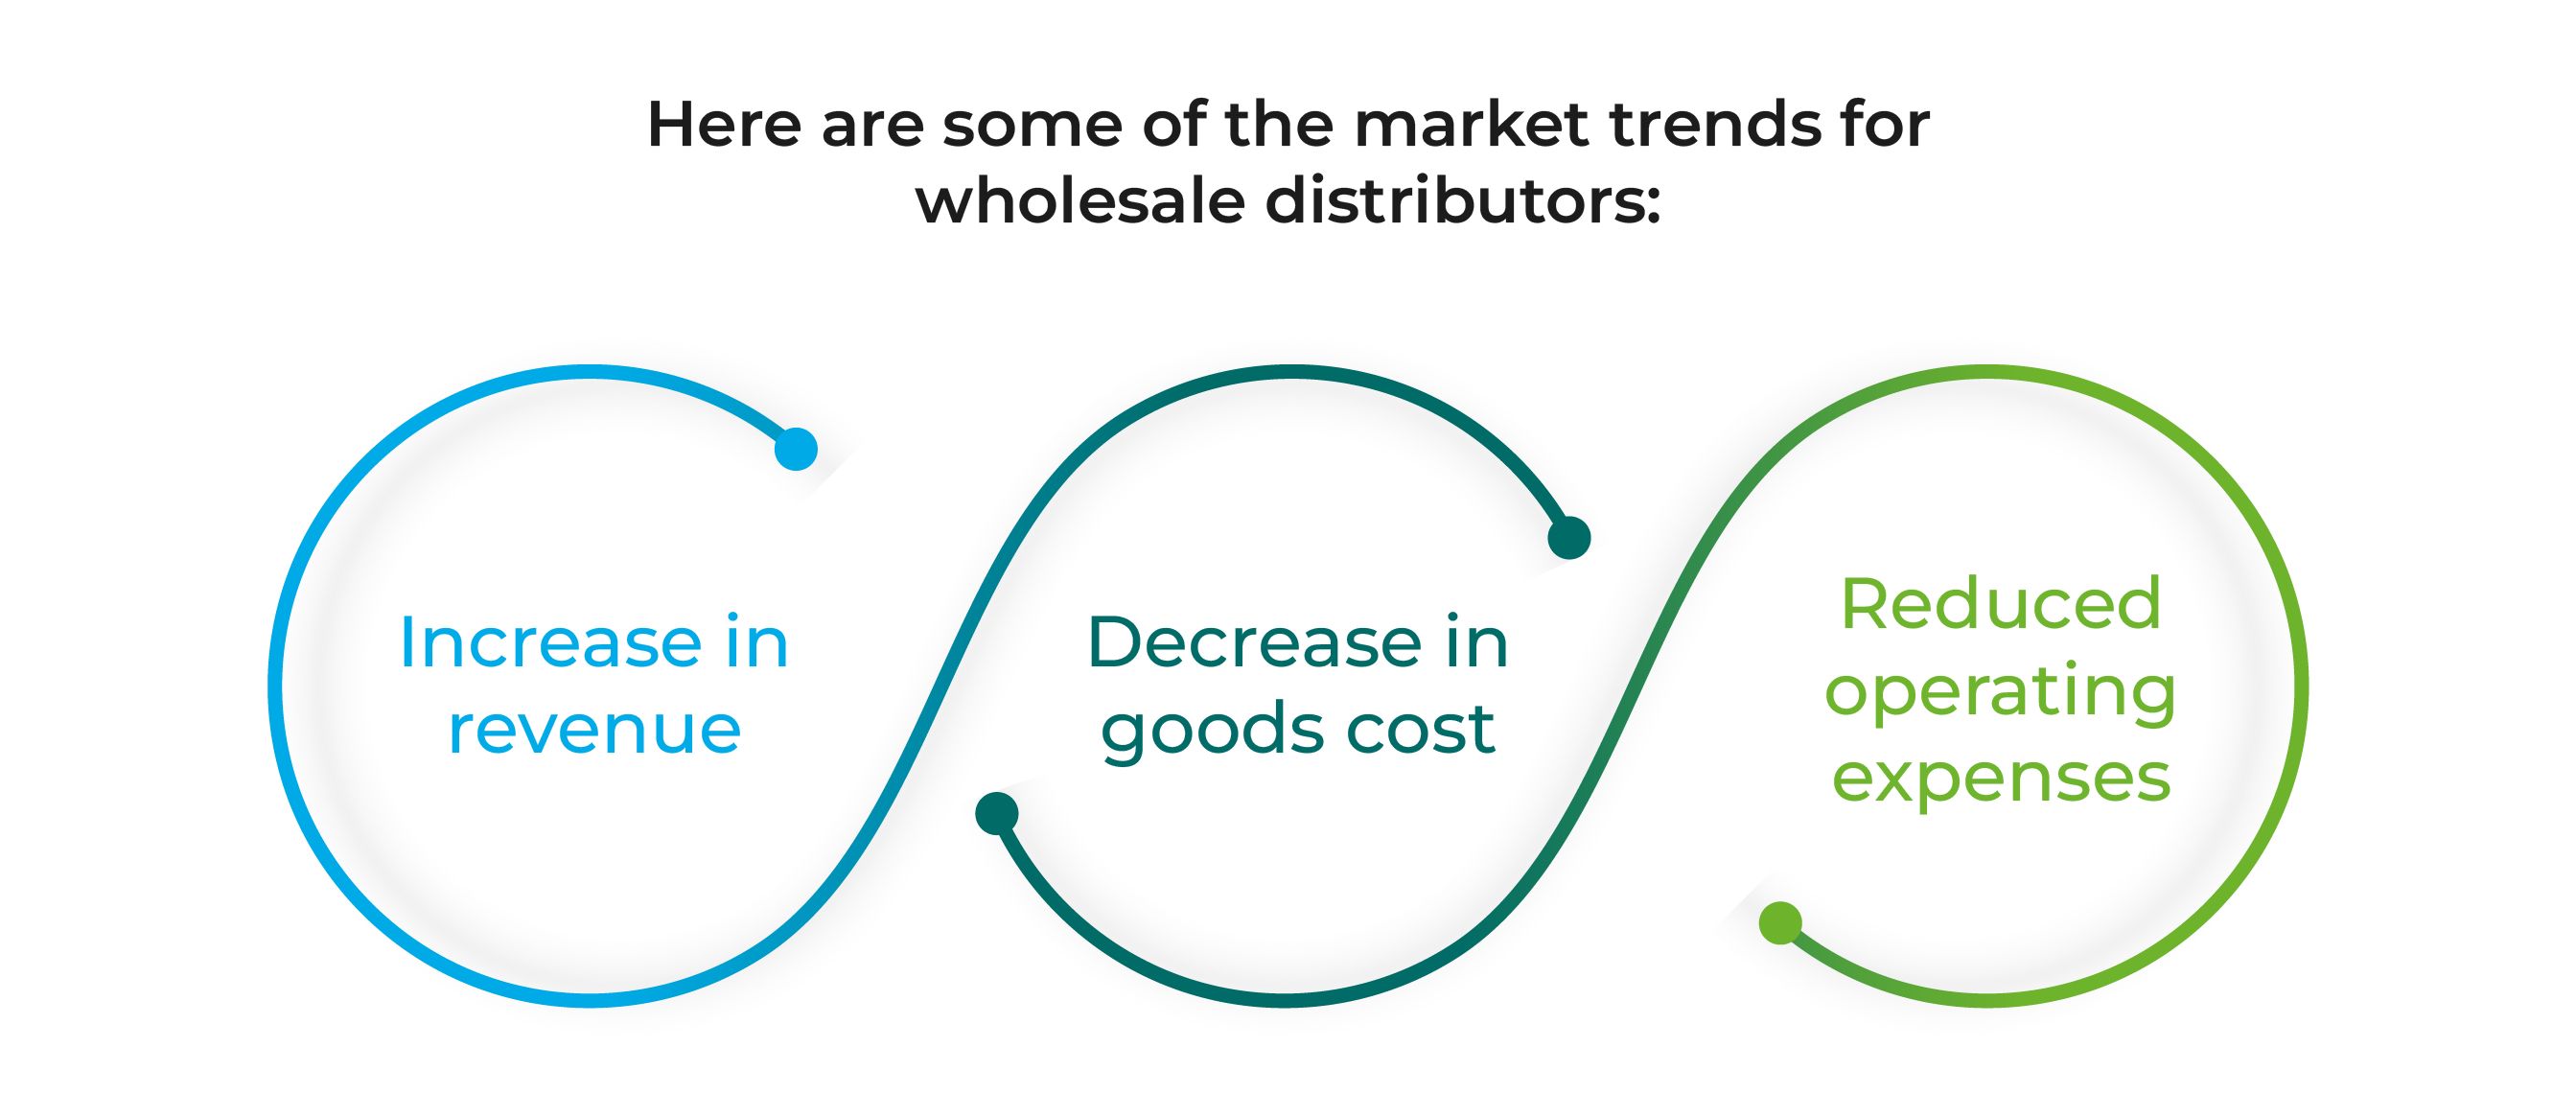 Here are some of the market trends for wholesale distributors